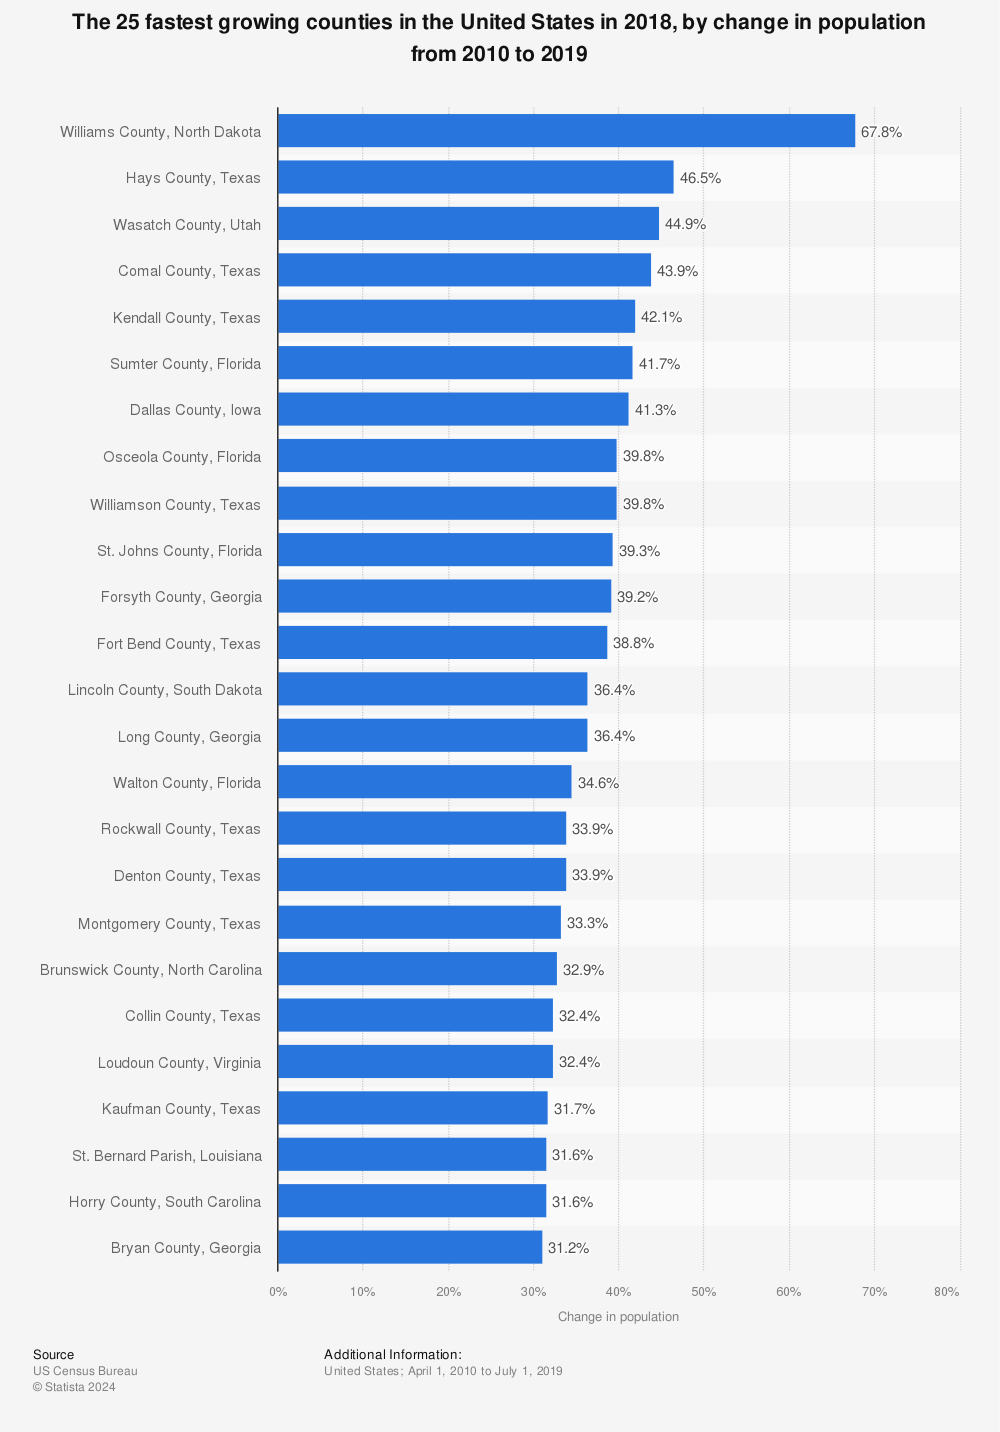 Statistic: The 25 fastest growing counties in the United States in 2018, by change in population from 2010 to 2019 | Statista